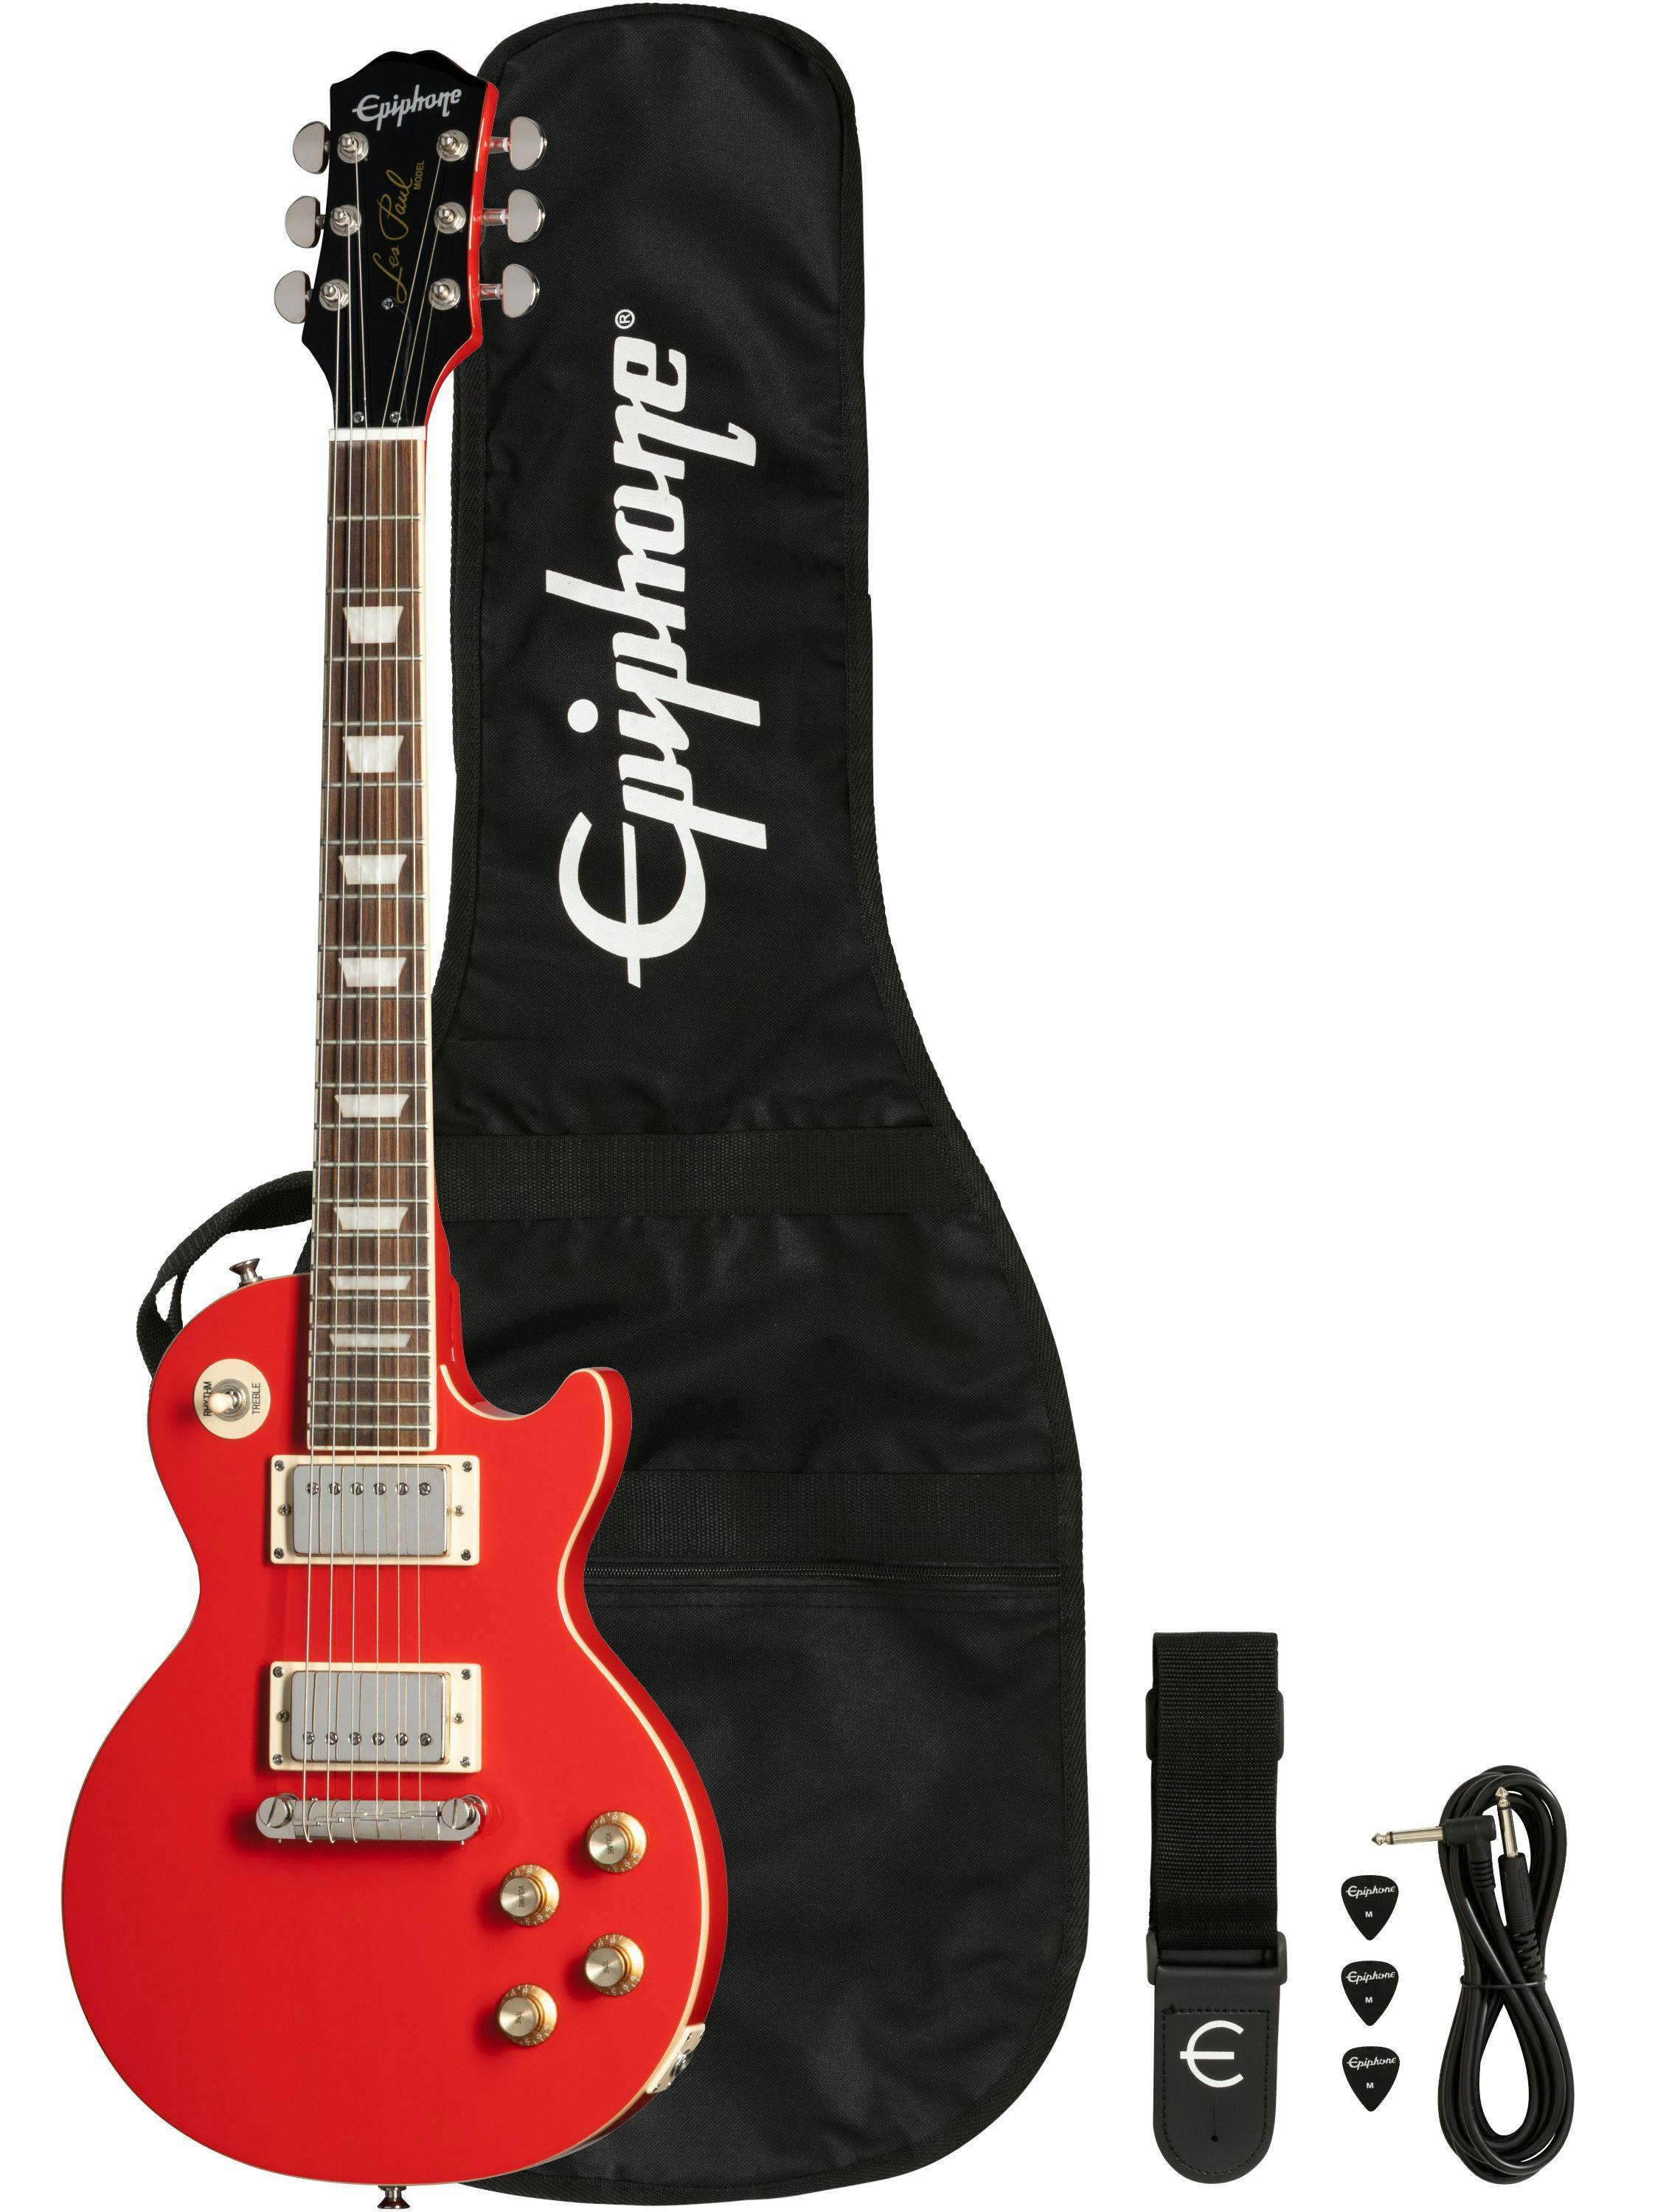 Epiphone Power Players Les Paul Electric Guitar in Lava Red with  Accessories - Andertons Music Co.